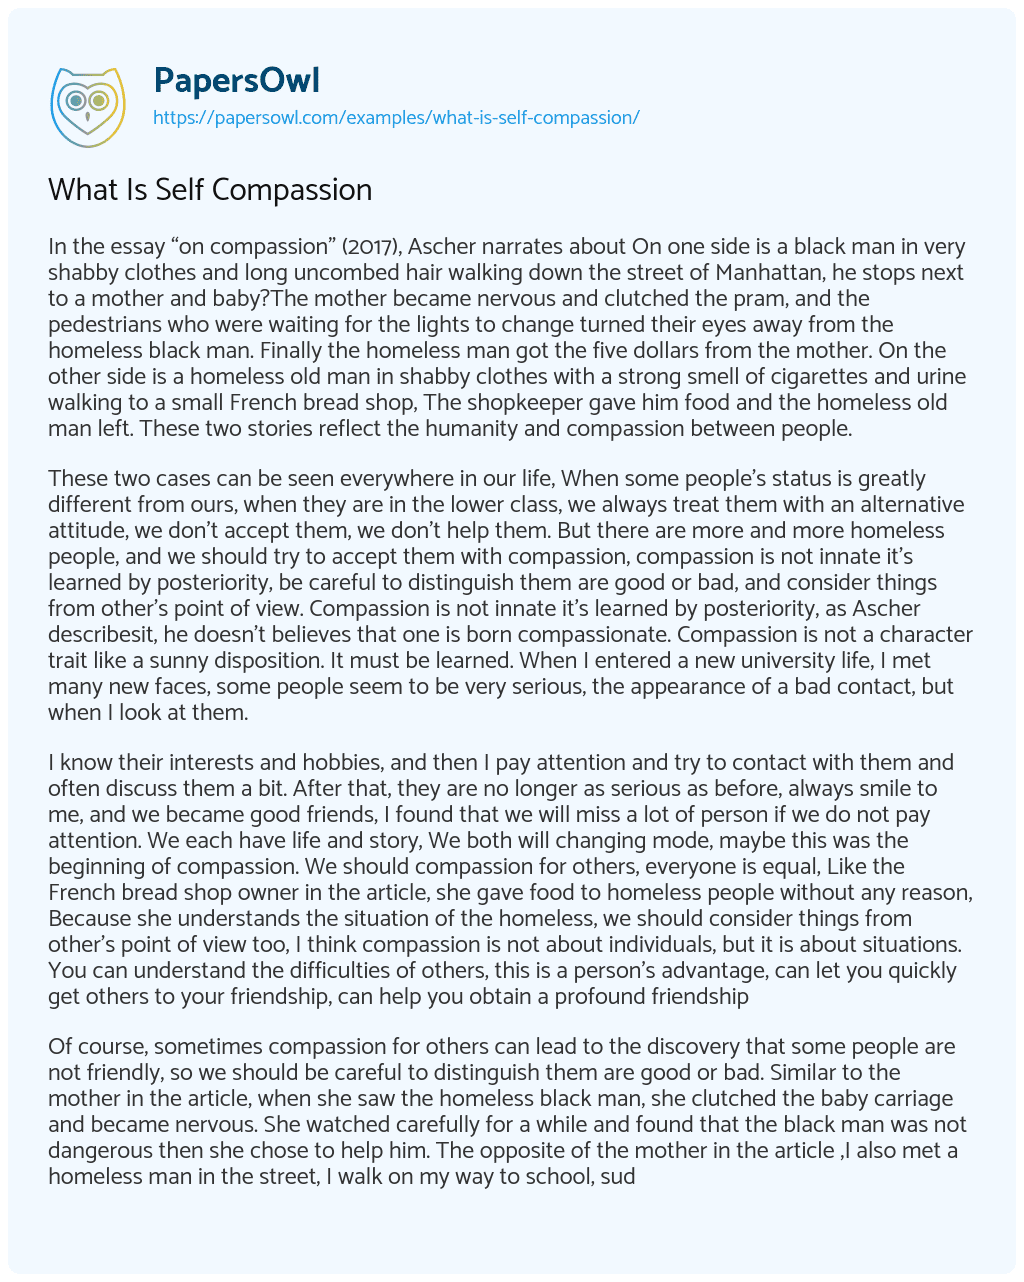 Essay on What is Self Compassion